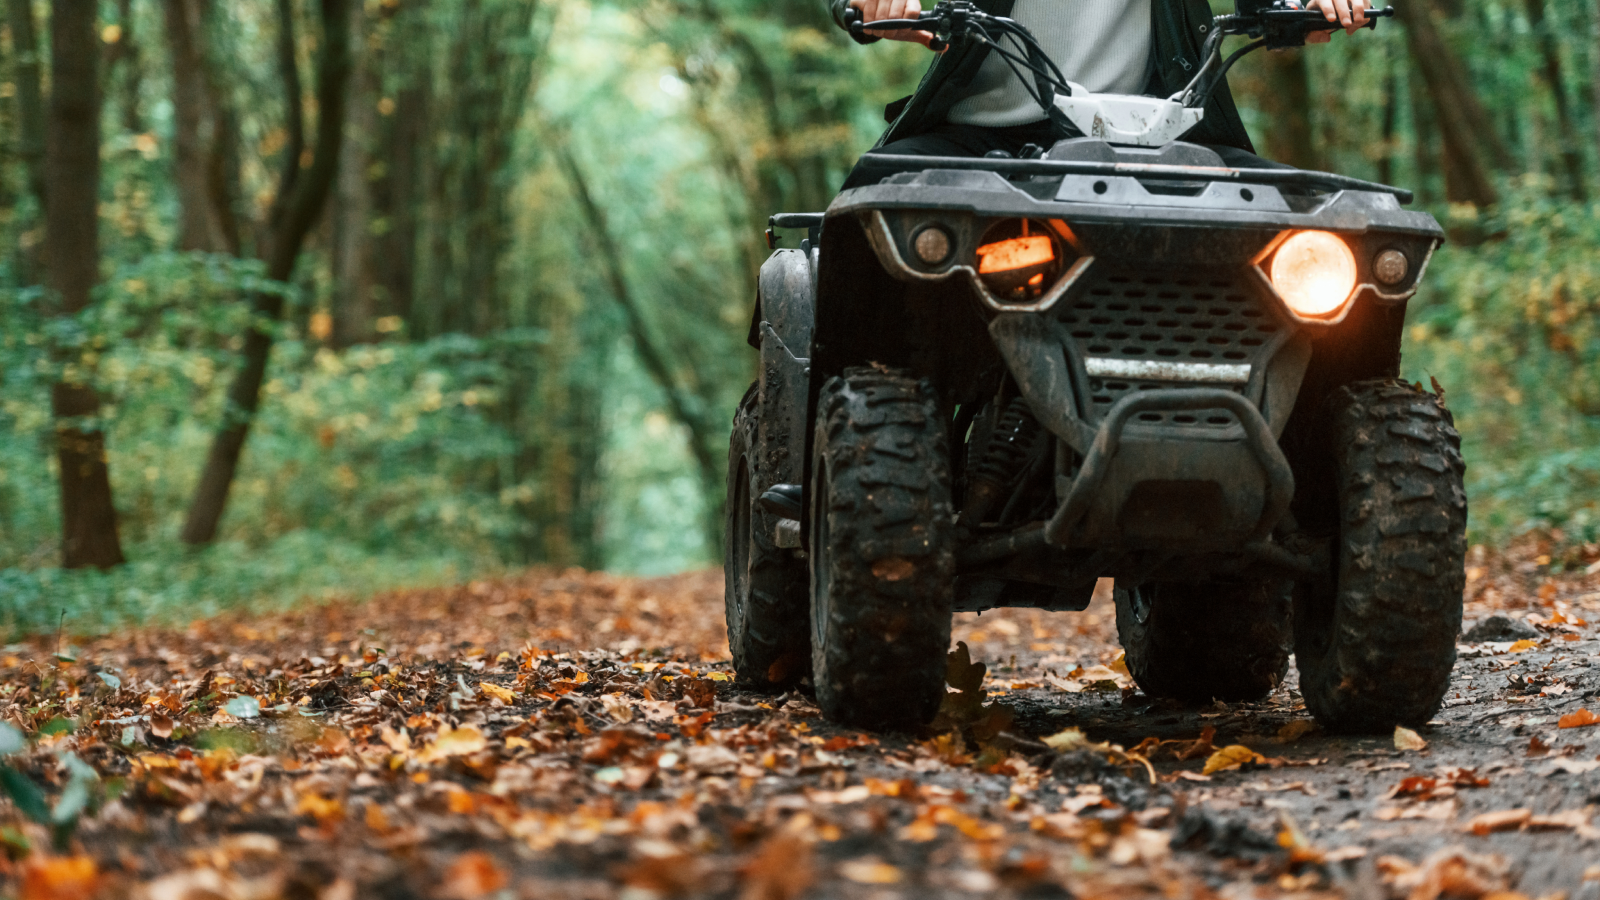 ATV Insurance: What Does It Cover and How Much Is It? - ValuePenguin